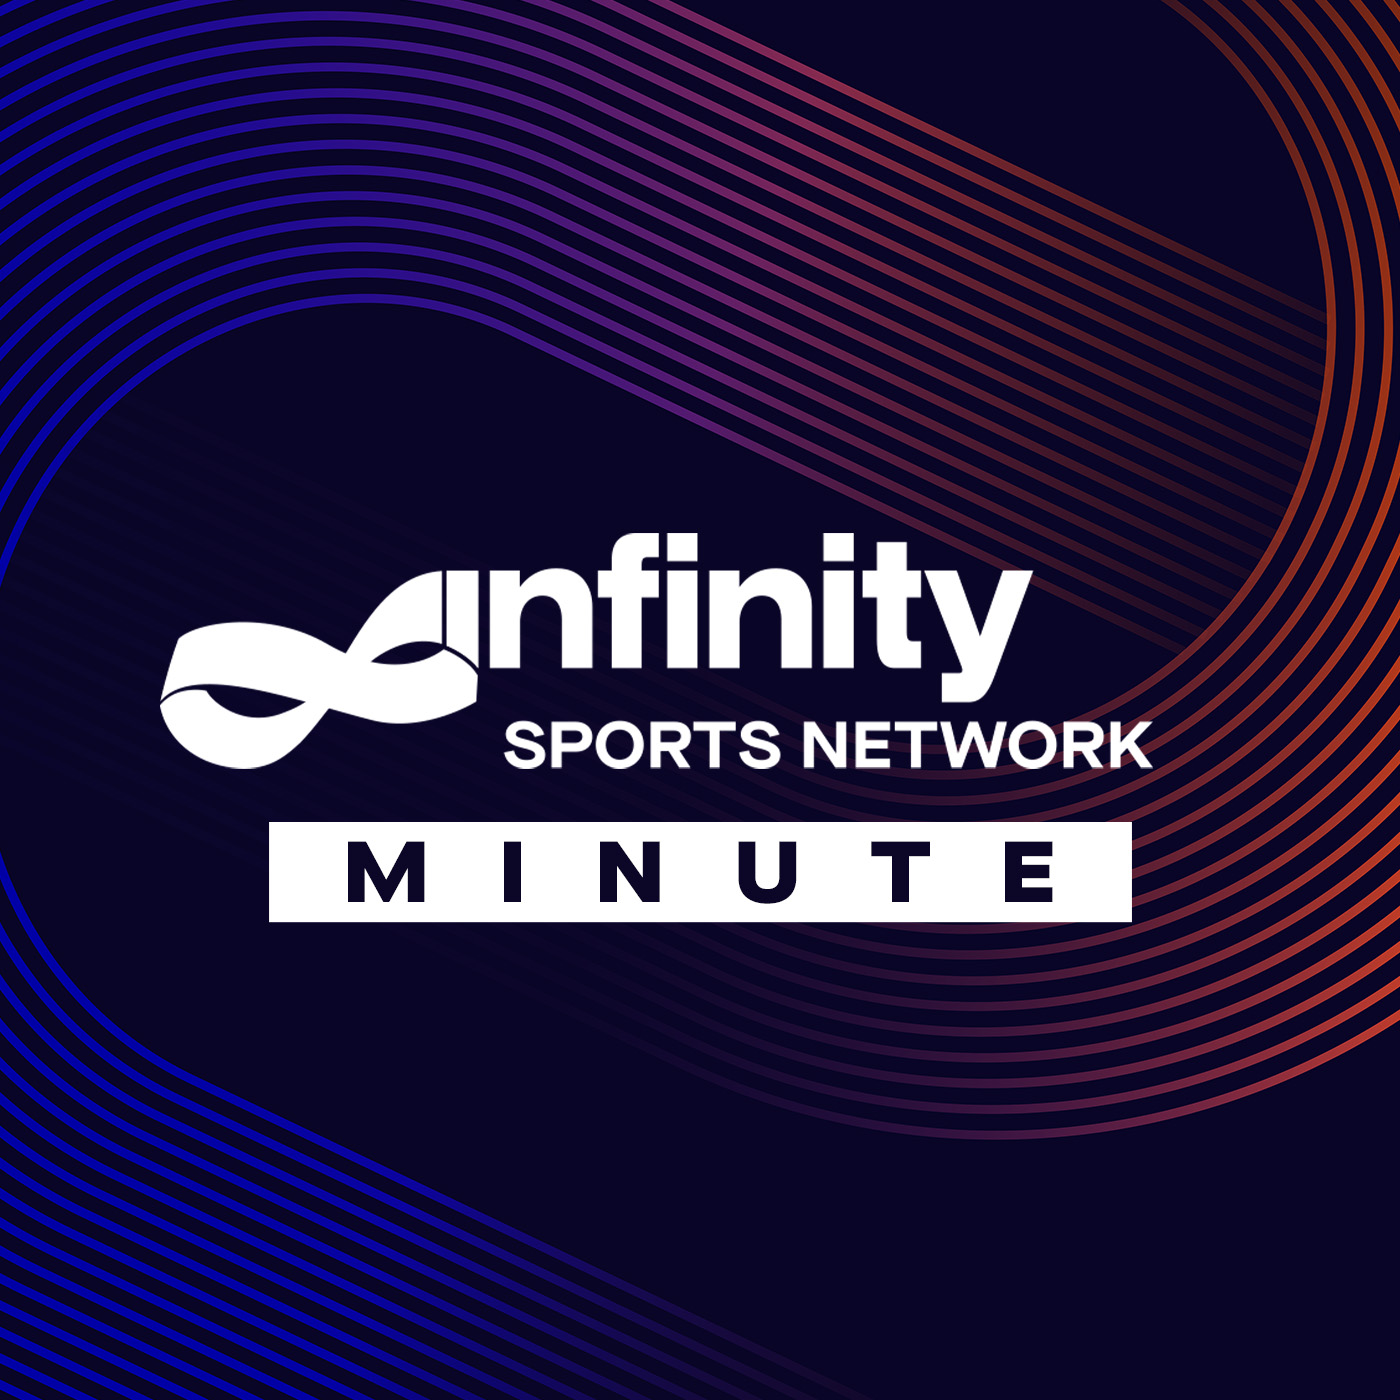 5-23 Andrew Perloff Sports Minute on the NFL Schedule